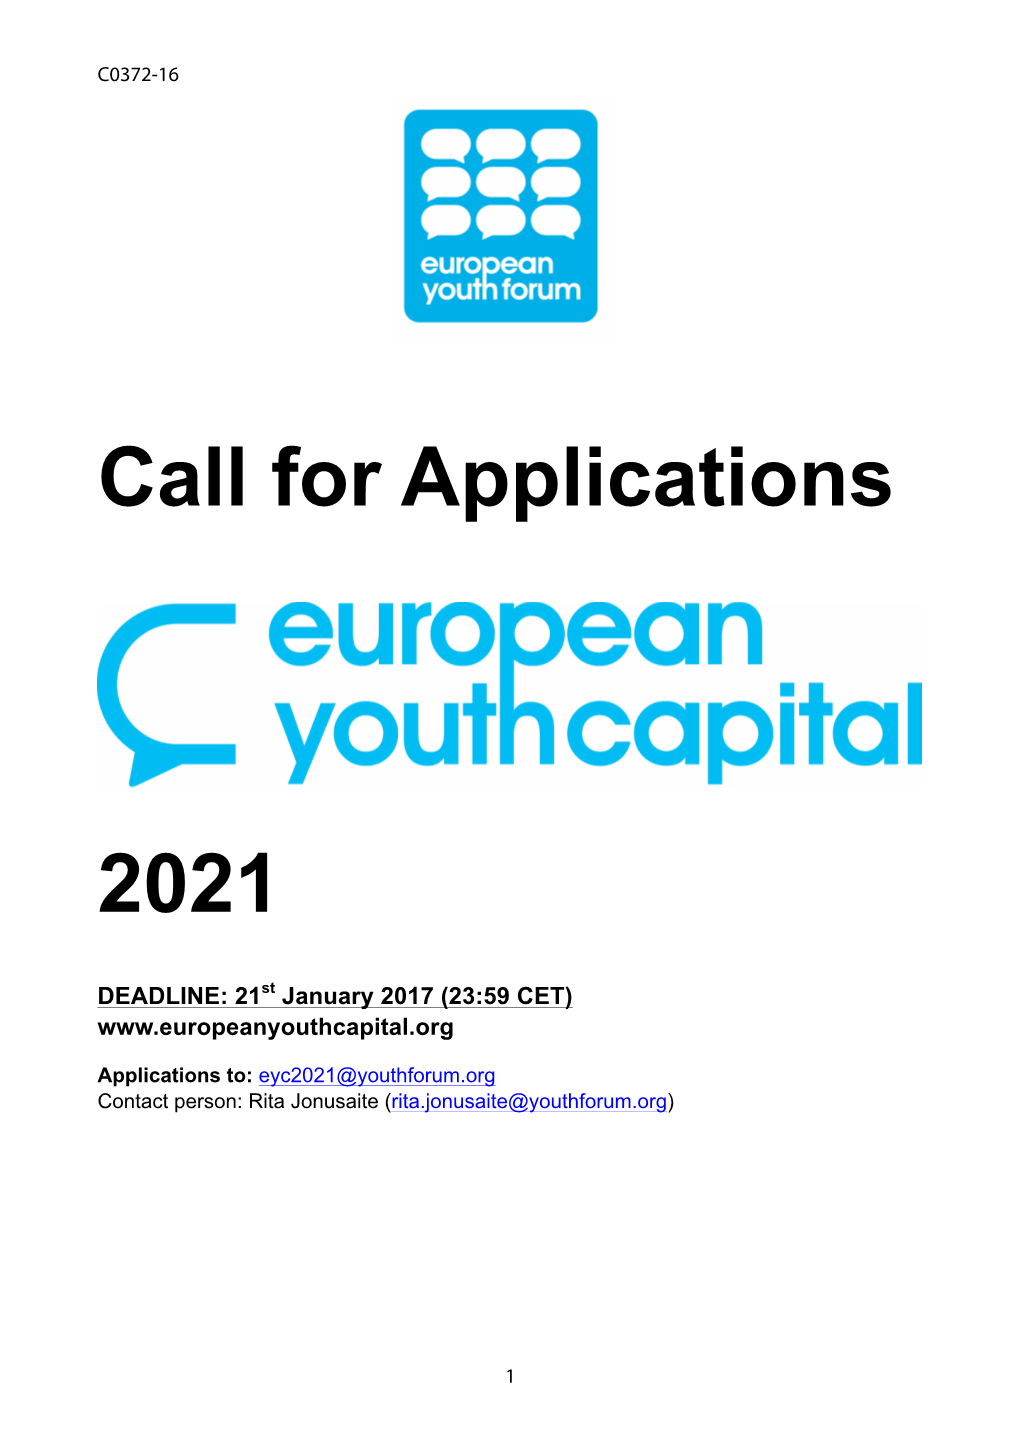 Call for Applications 2021